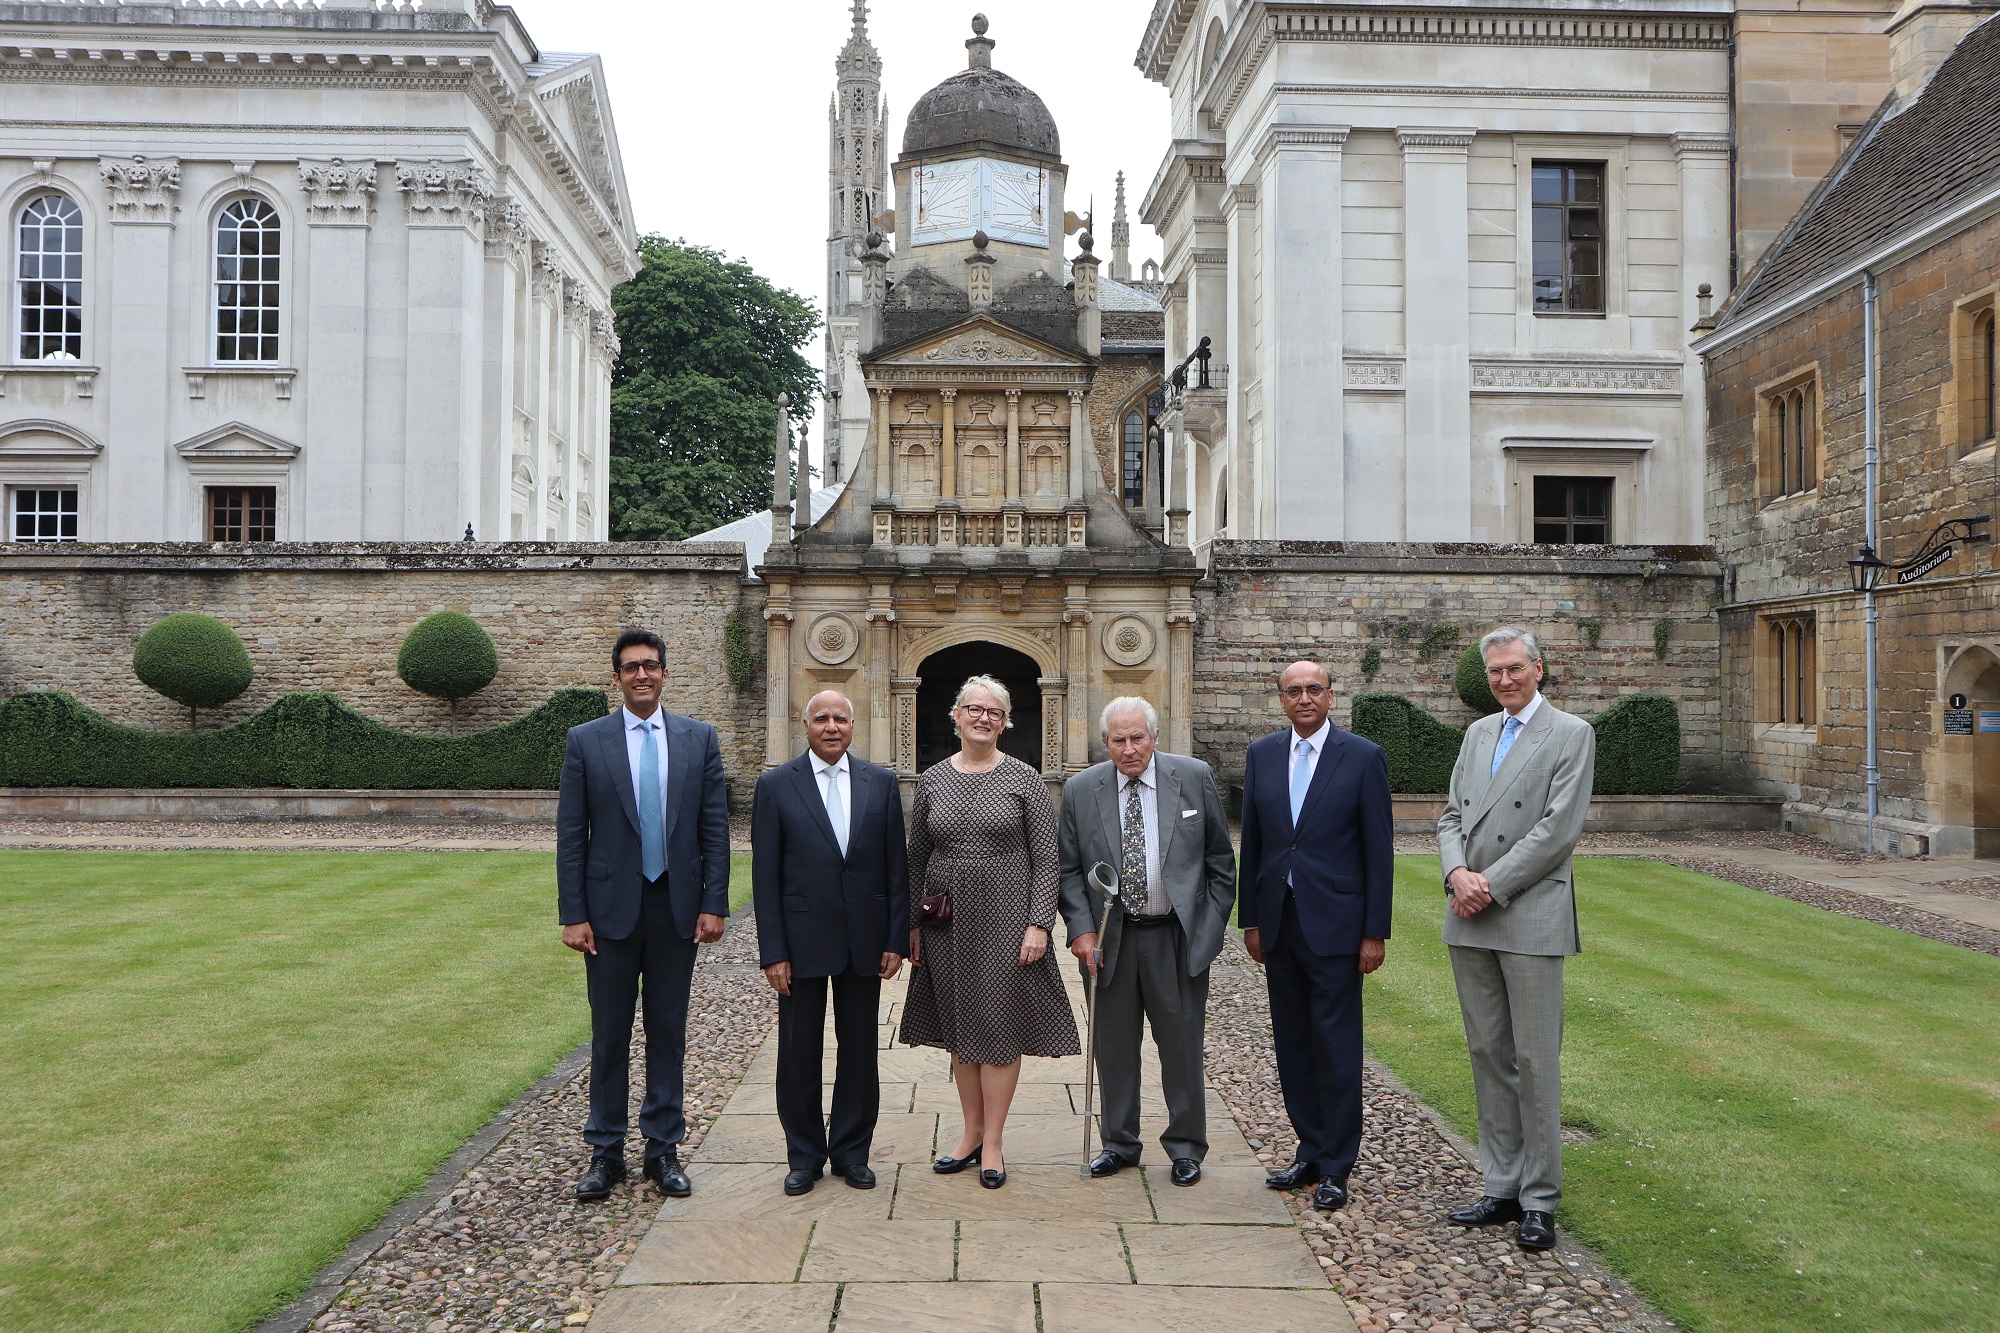 Haider Choudrey, Sir Anwar Pervez, Dr Pippa Rogerson, Sir Nicolas Barrington, Lord Zameer Choudrey, and Robert Gardiner standing in Caius Court in front of the Gate of Honour